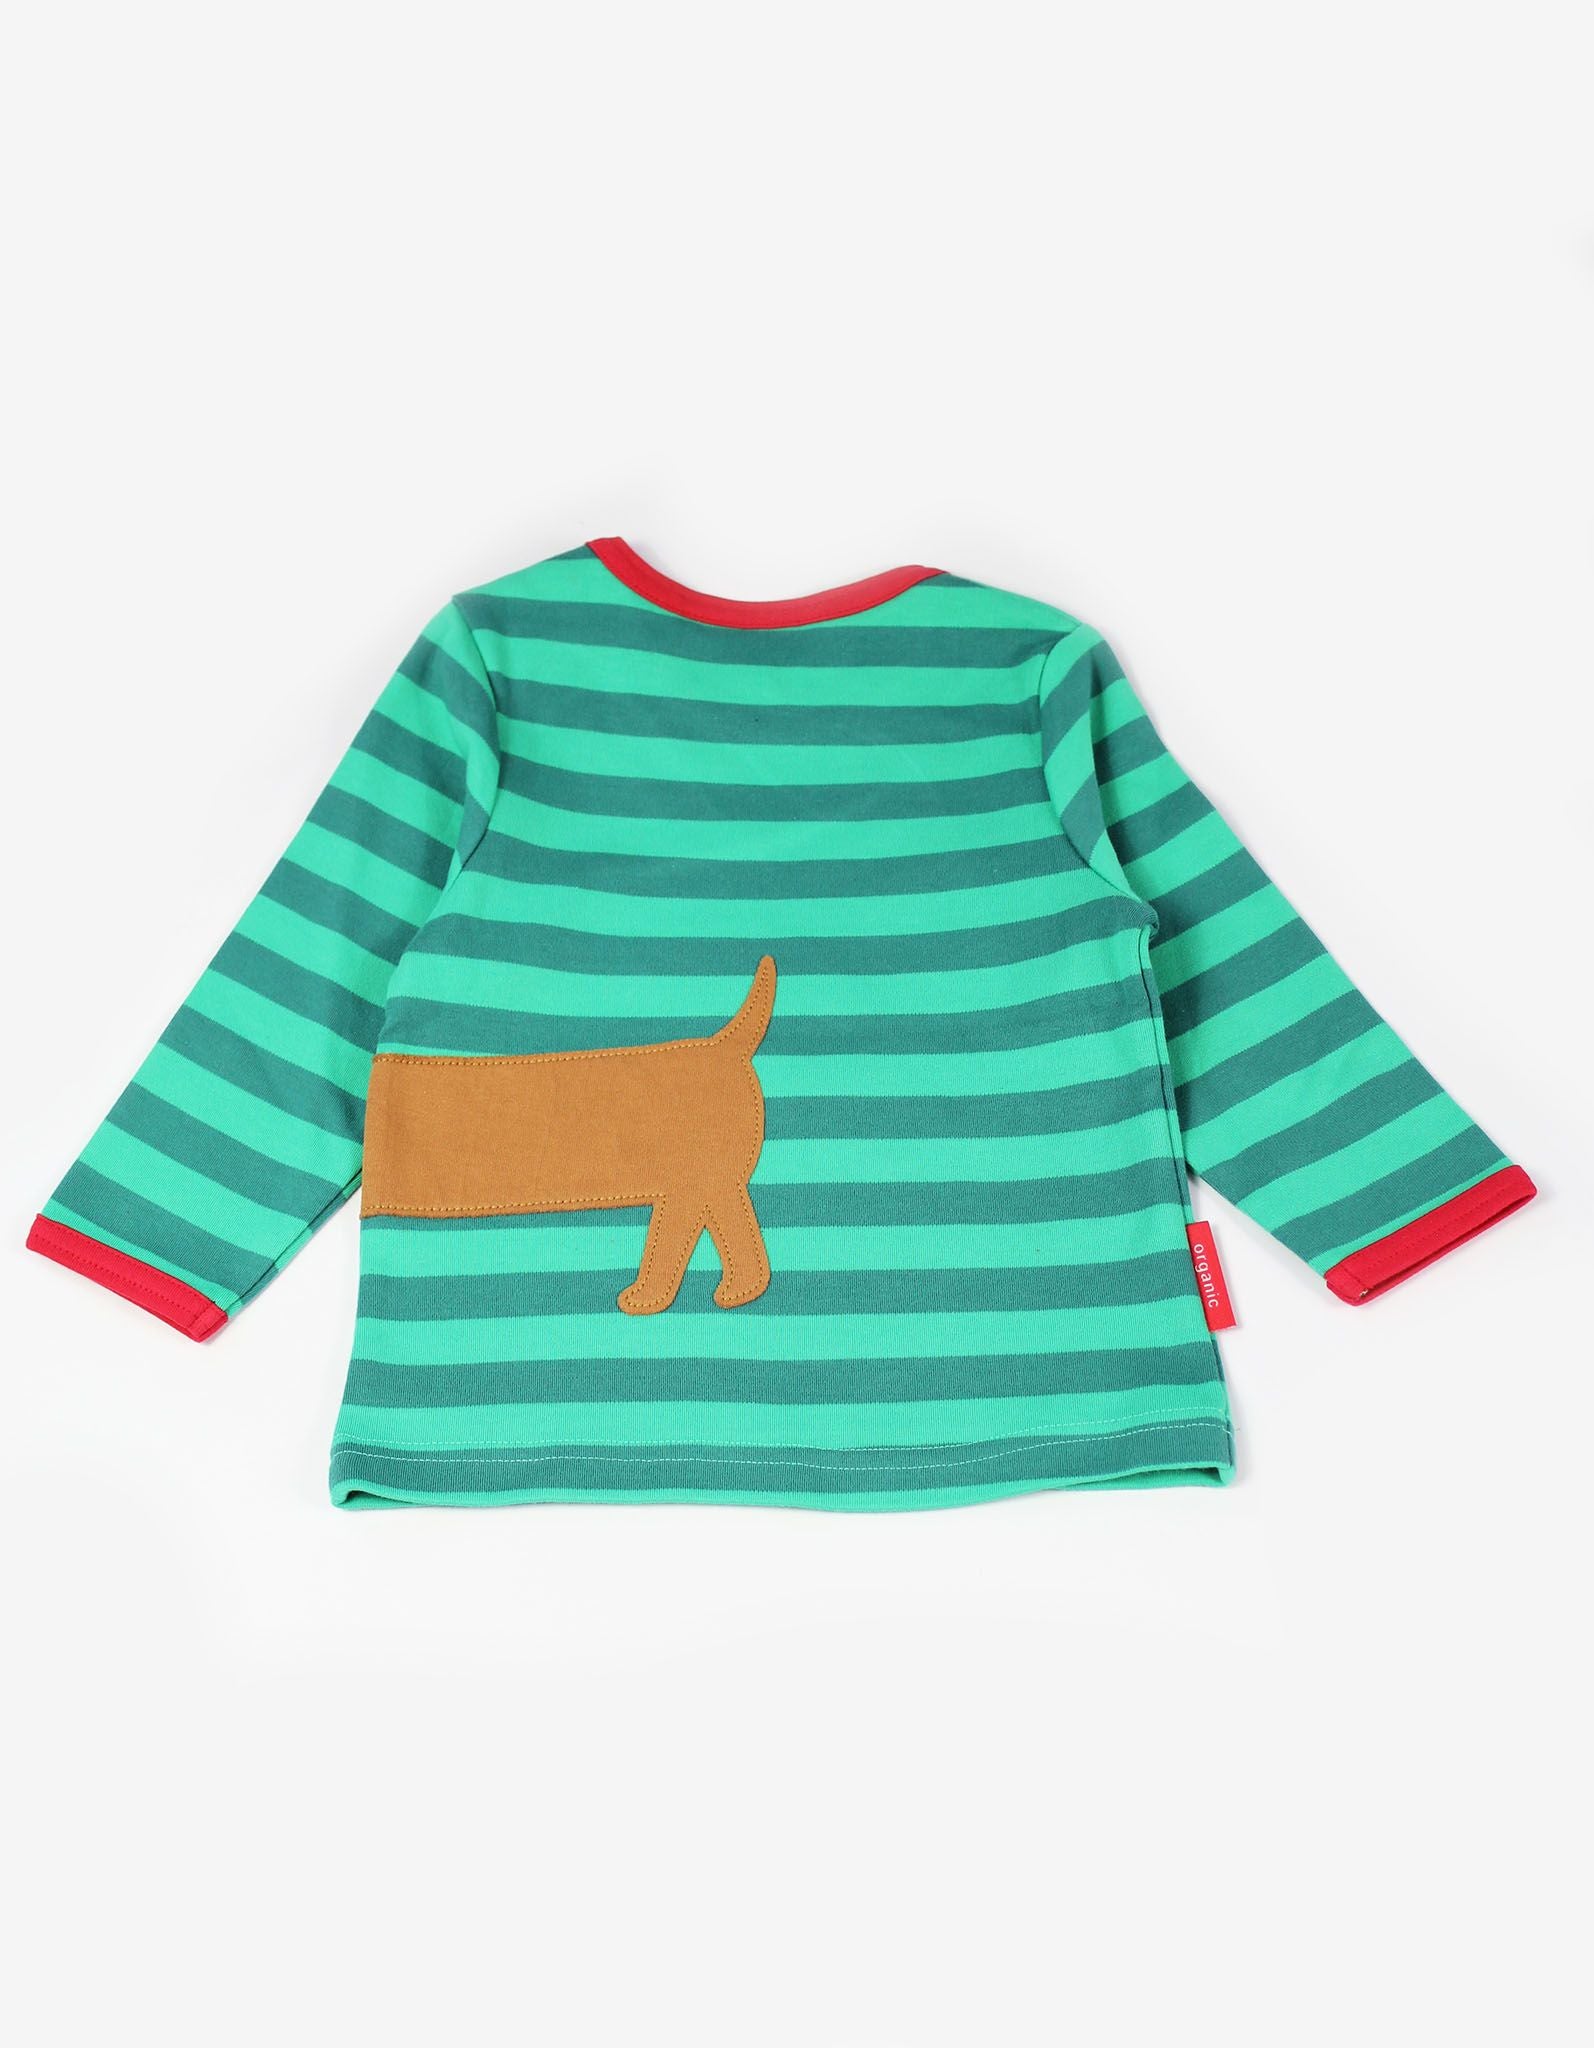 green striped top with festive sausage dog applique on the front